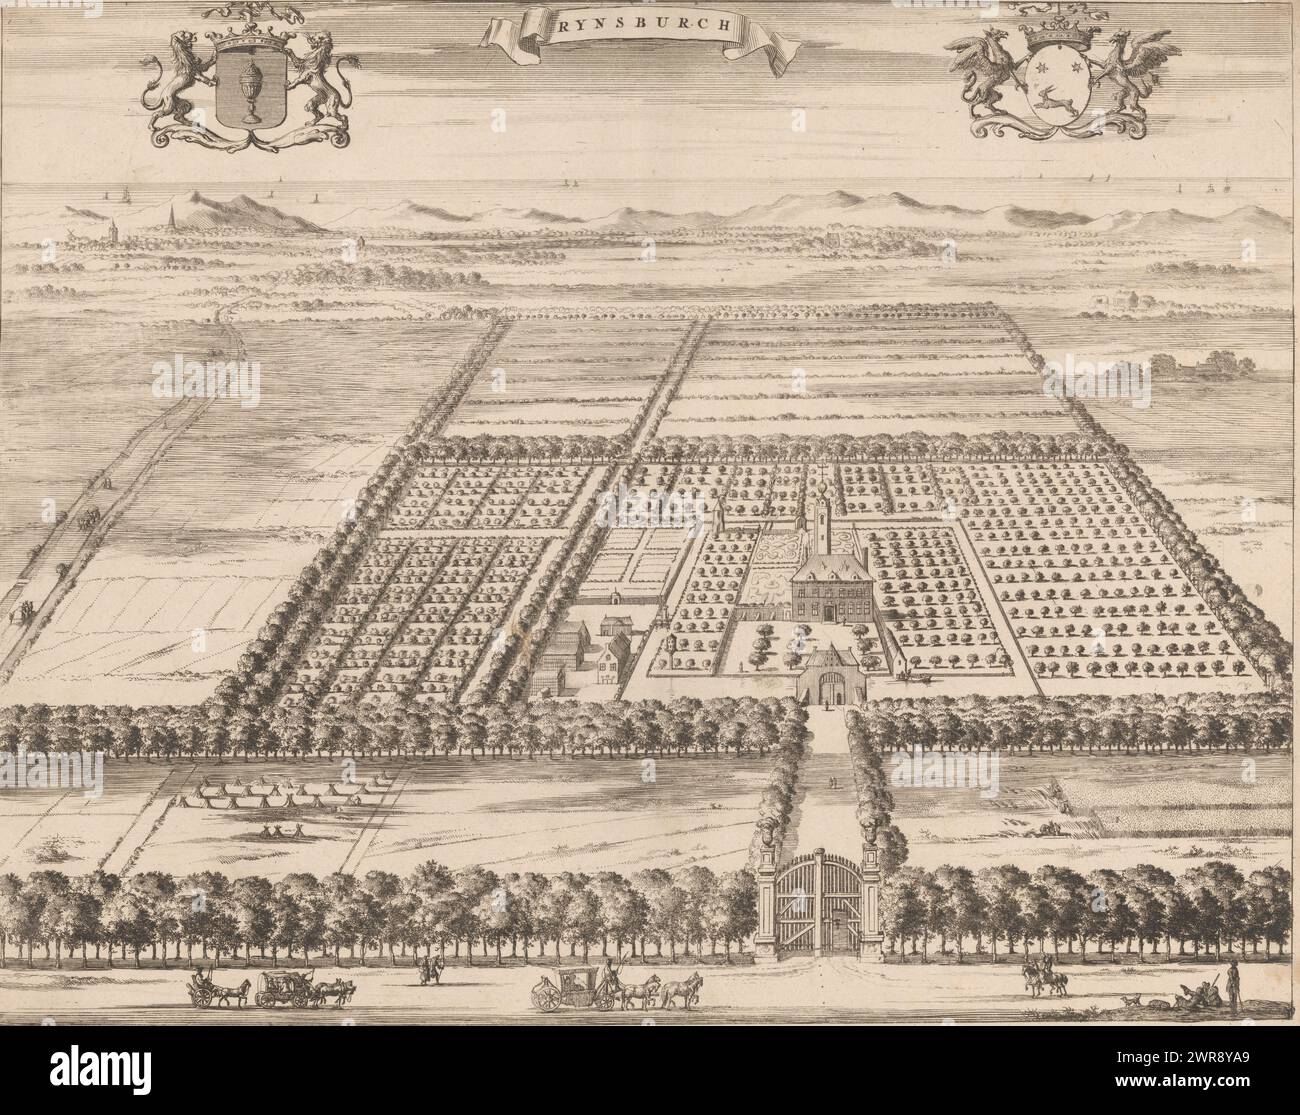 View of the Rijnsburg country estate, Rynsburch (title on object), View of the Rijnsburg country estate near Oostkapelle, from a bird's-eye perspective. To the right of the center is the country house surrounded by gardens and orchards. In the background the dunes and sea. Top left the coat of arms of owner Jacob Godin, in the middle a banderole with the title, top right the coat of arms of his wife Catharina de Haze., print maker: Jan Luyken, Amsterdam, in or before 1696, paper, etching, engraving, height 274 mm × width 340 mm, print Stock Photo